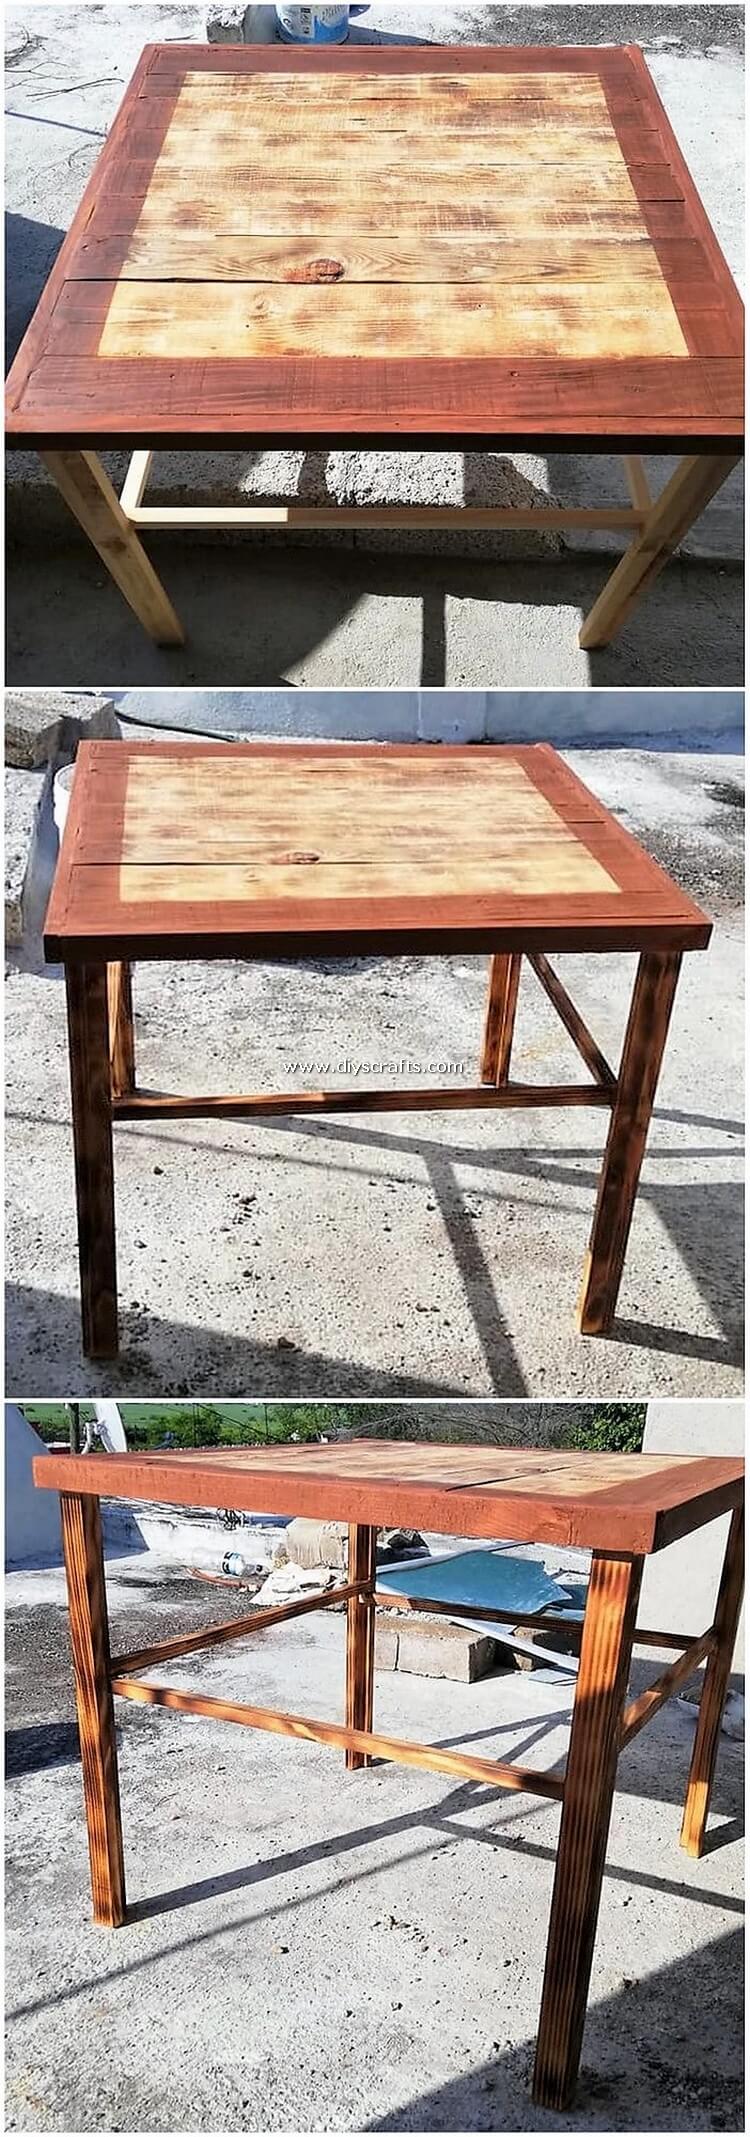 Pallet-Wood-Table-1